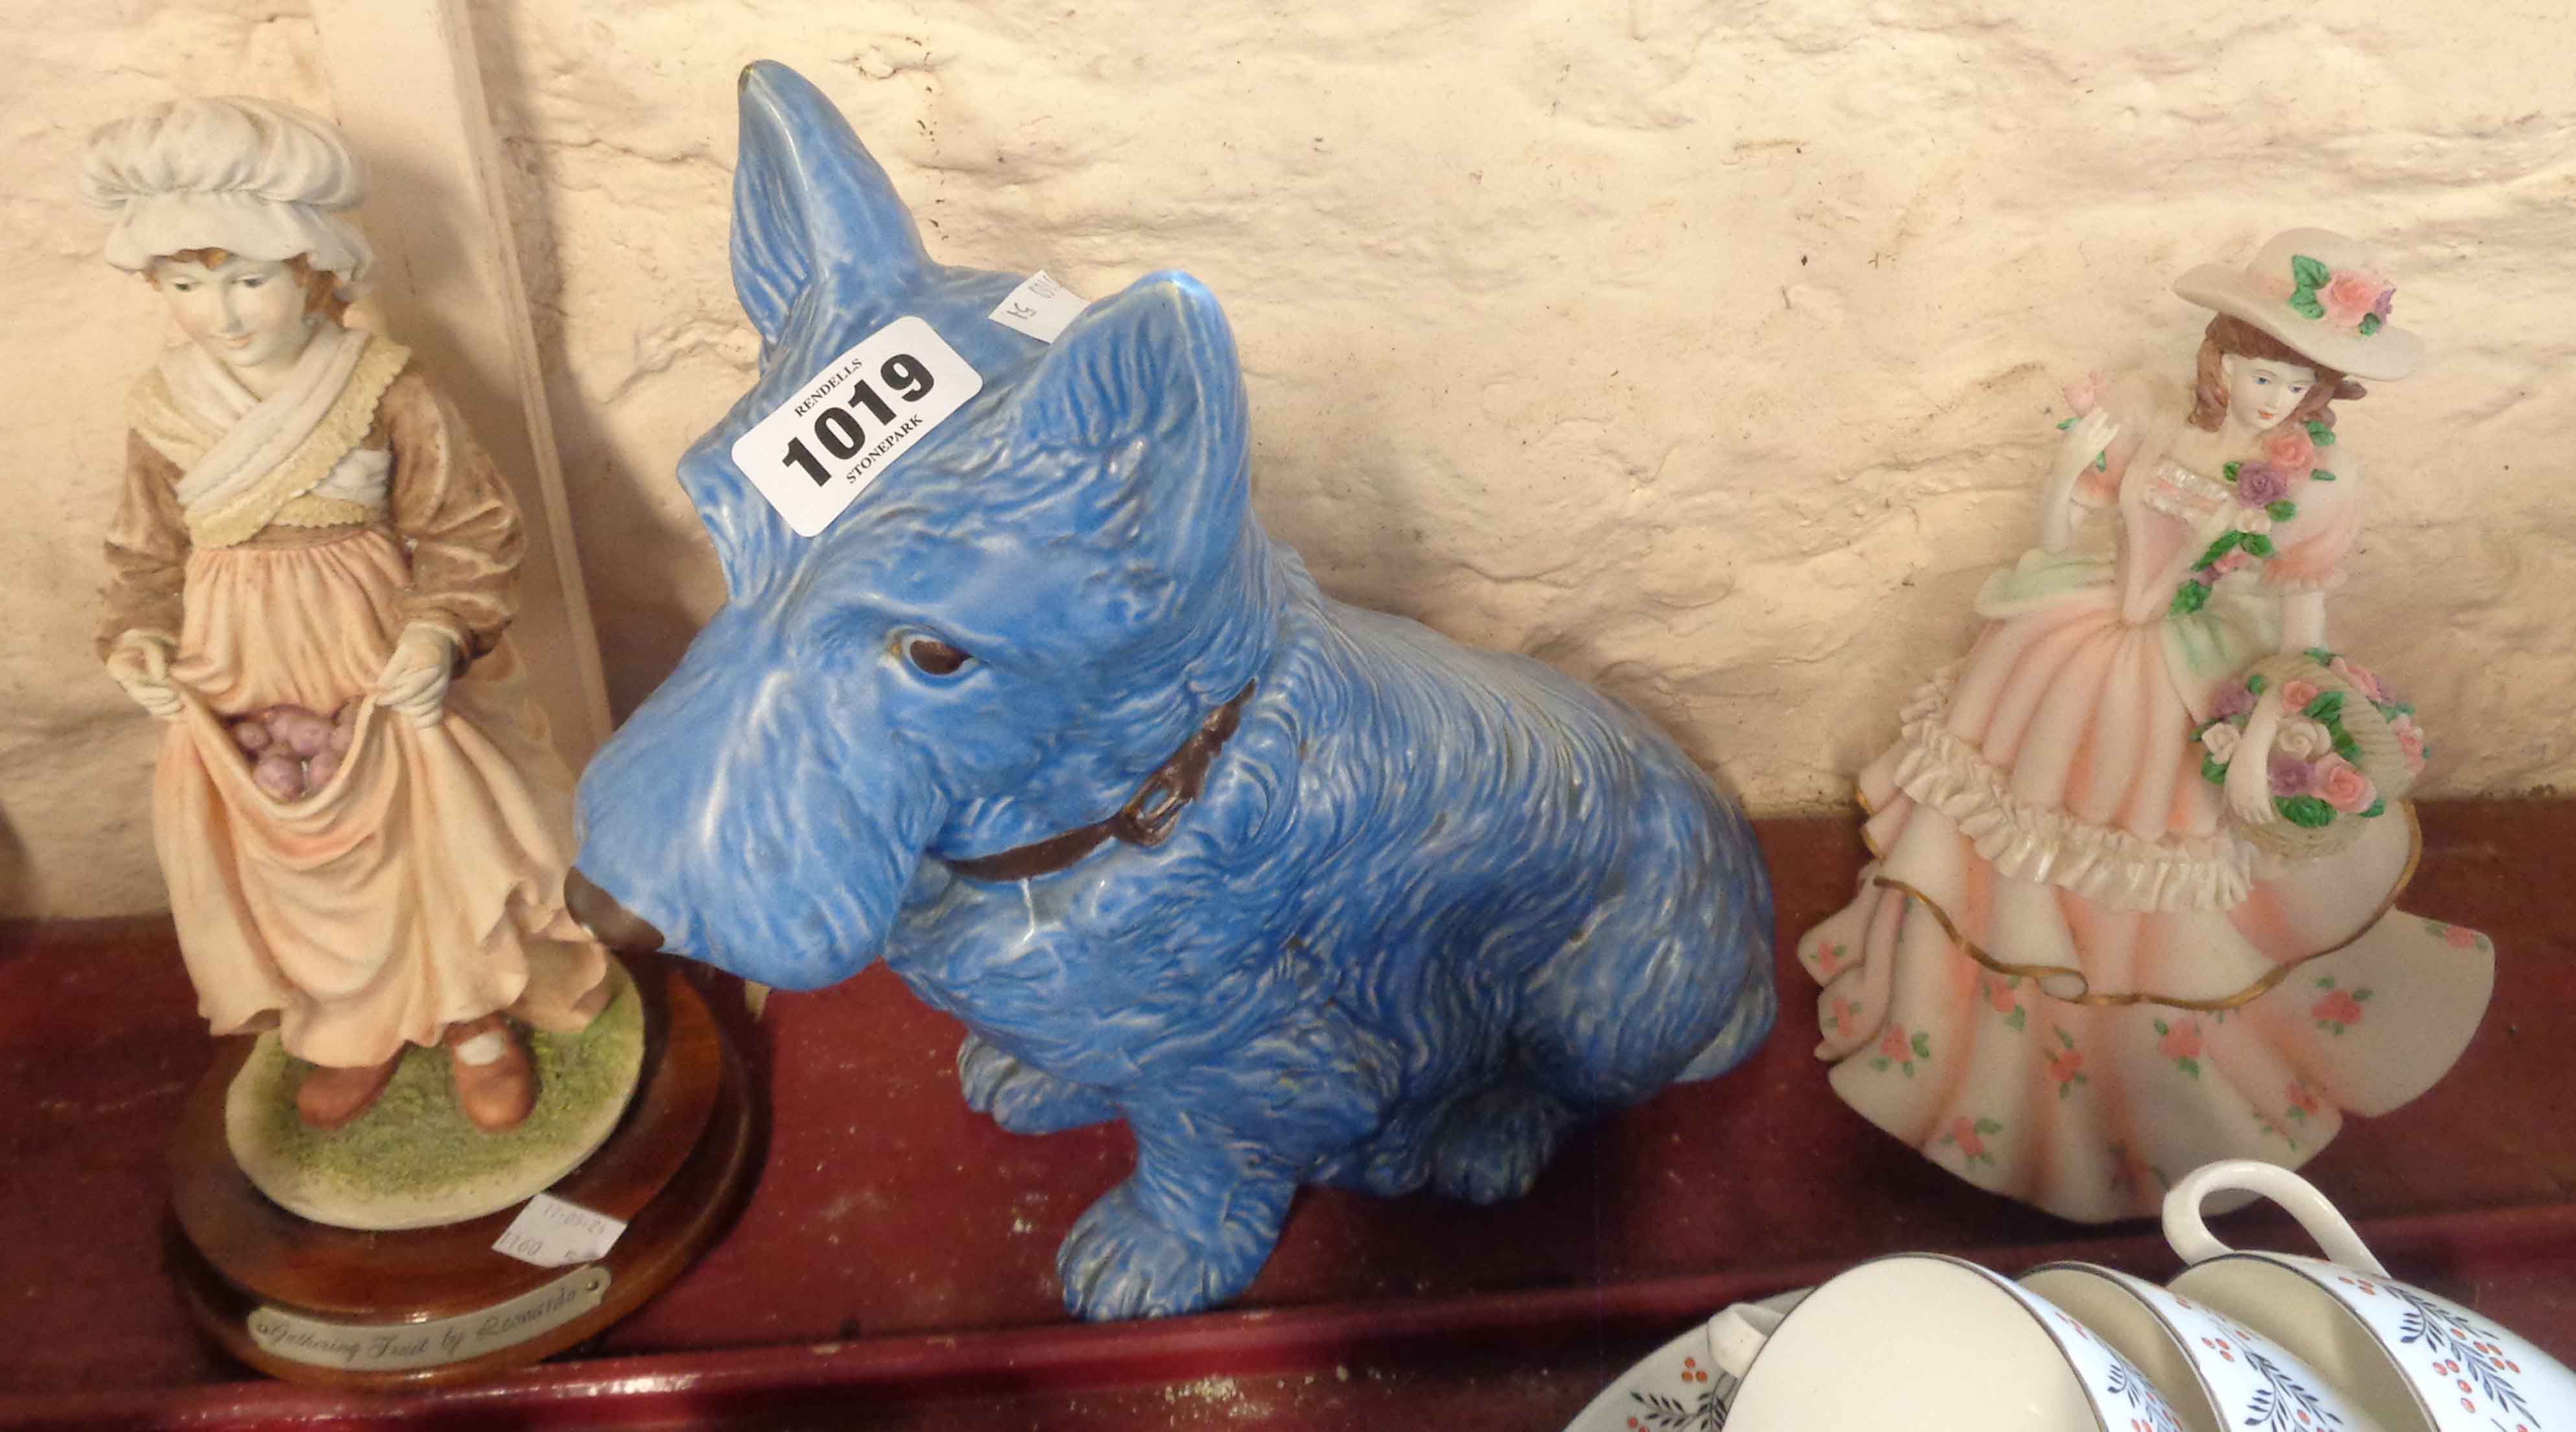 A large SylvaC pottery terrier figurine with blue glaze finish - sold with two resin figurines